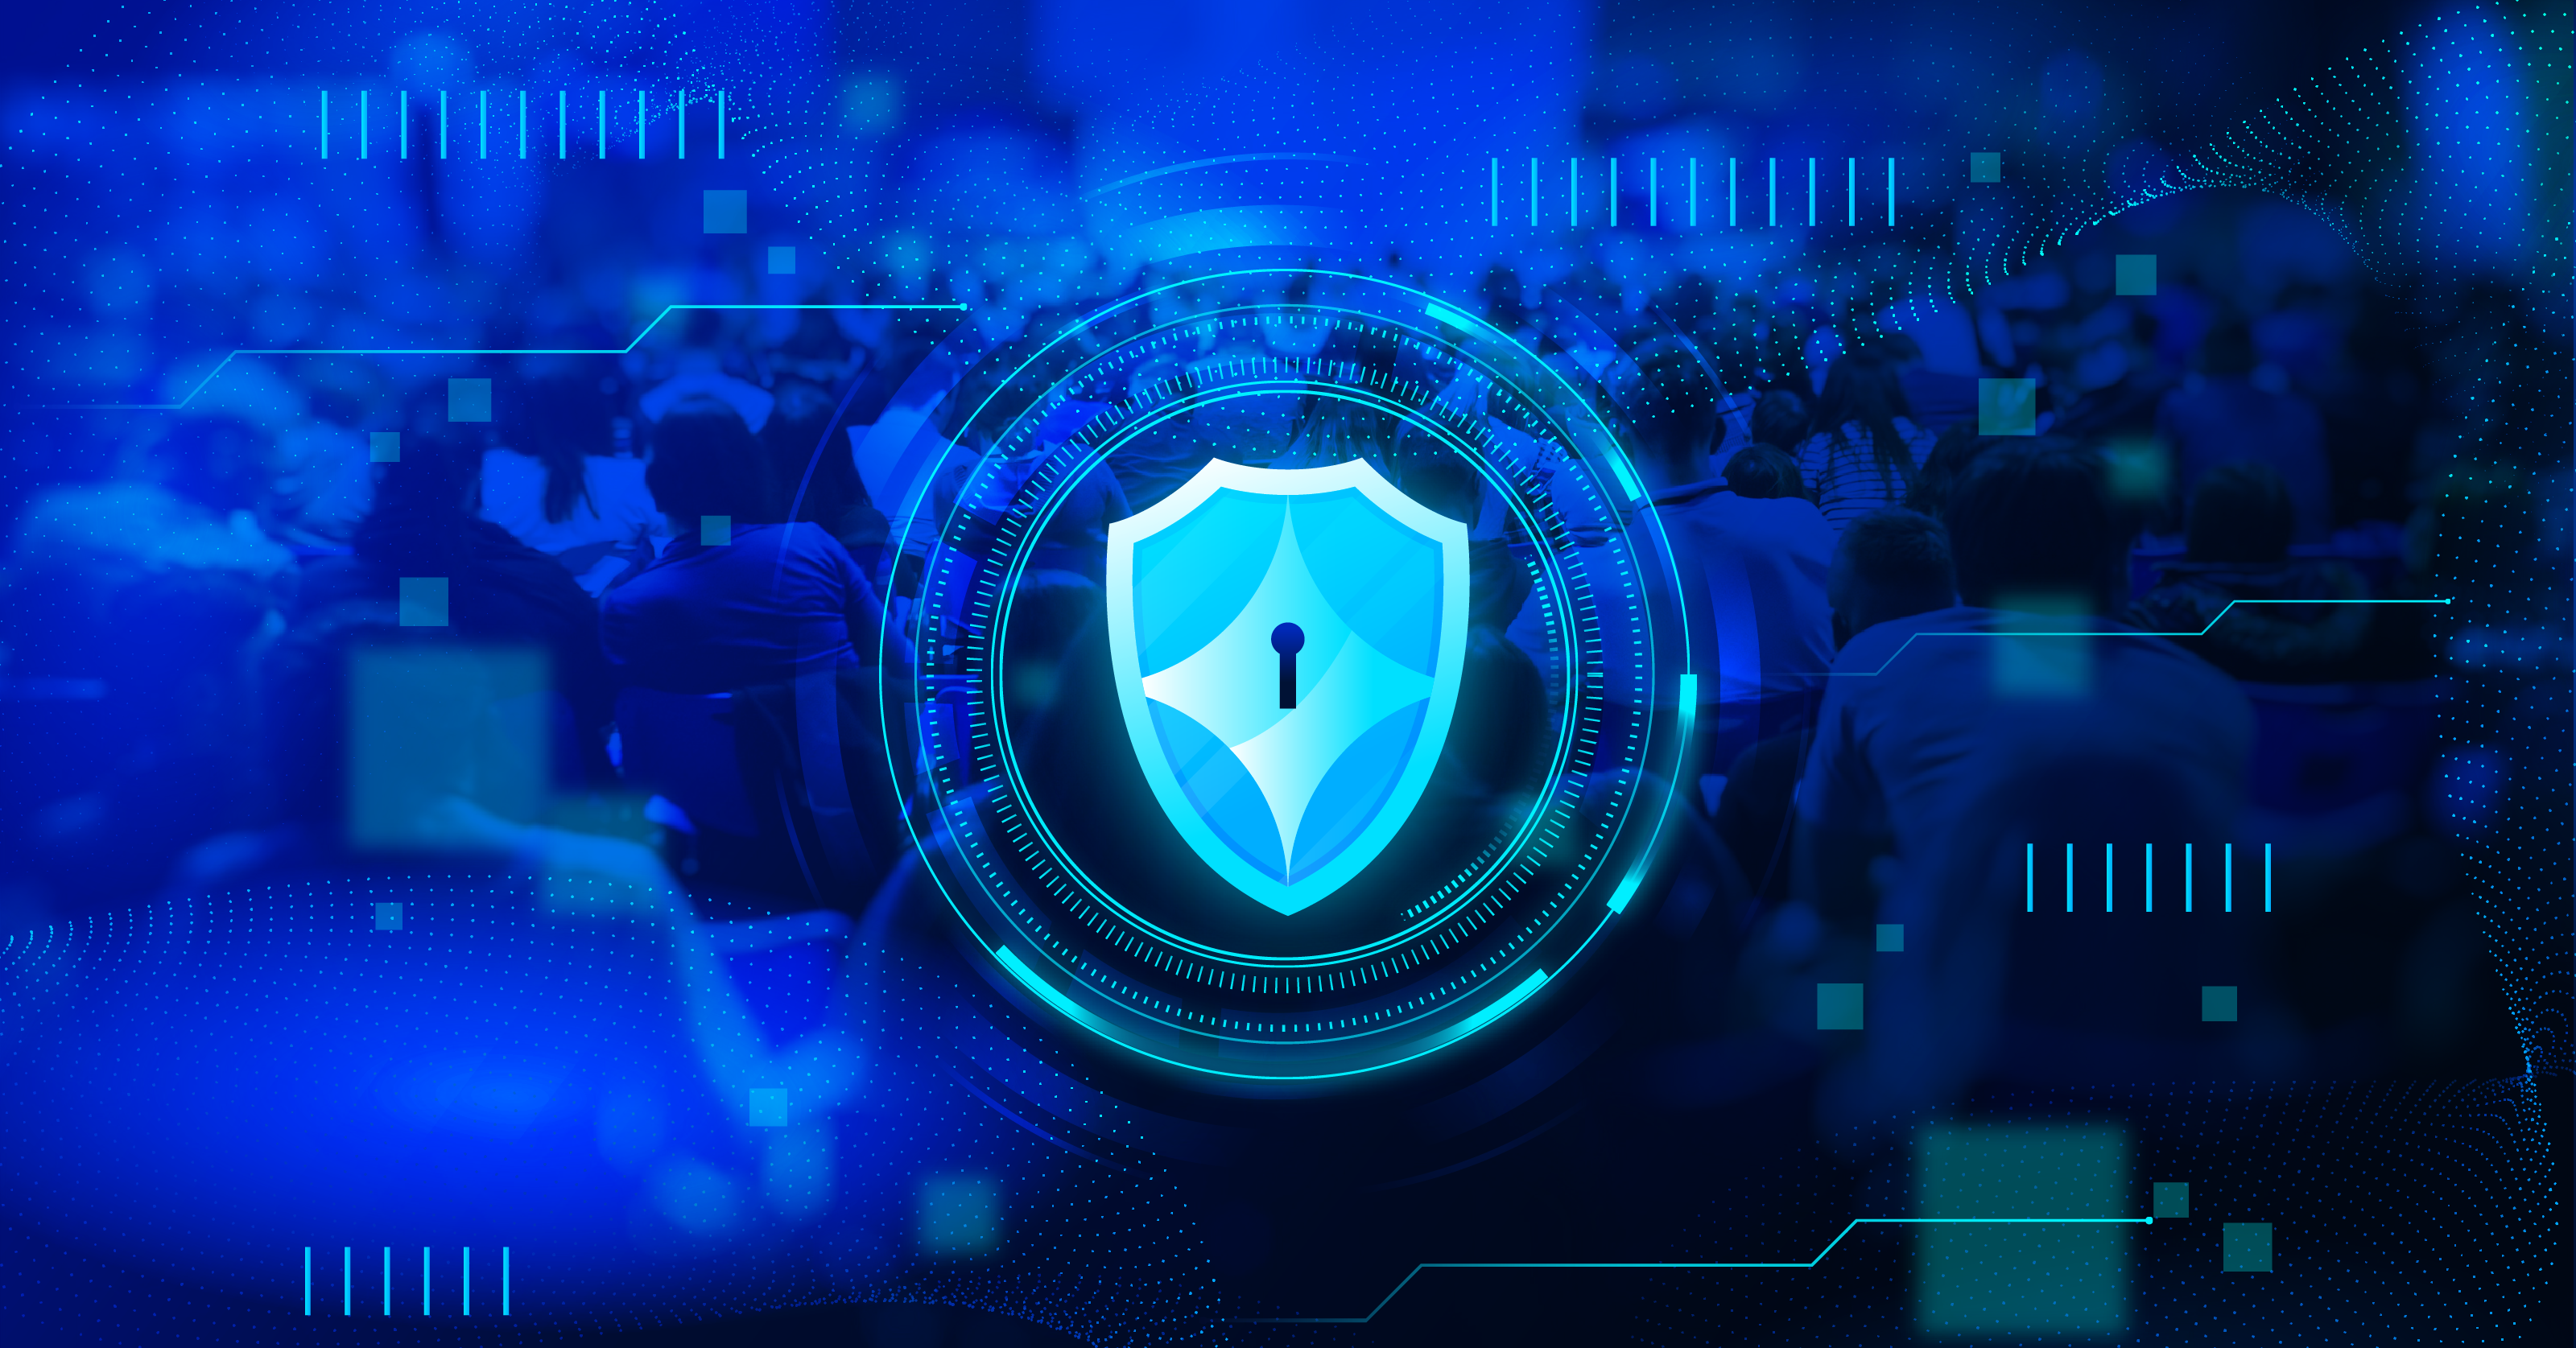 7 Sureshot Tactics to Make Your Events Digitally Secure